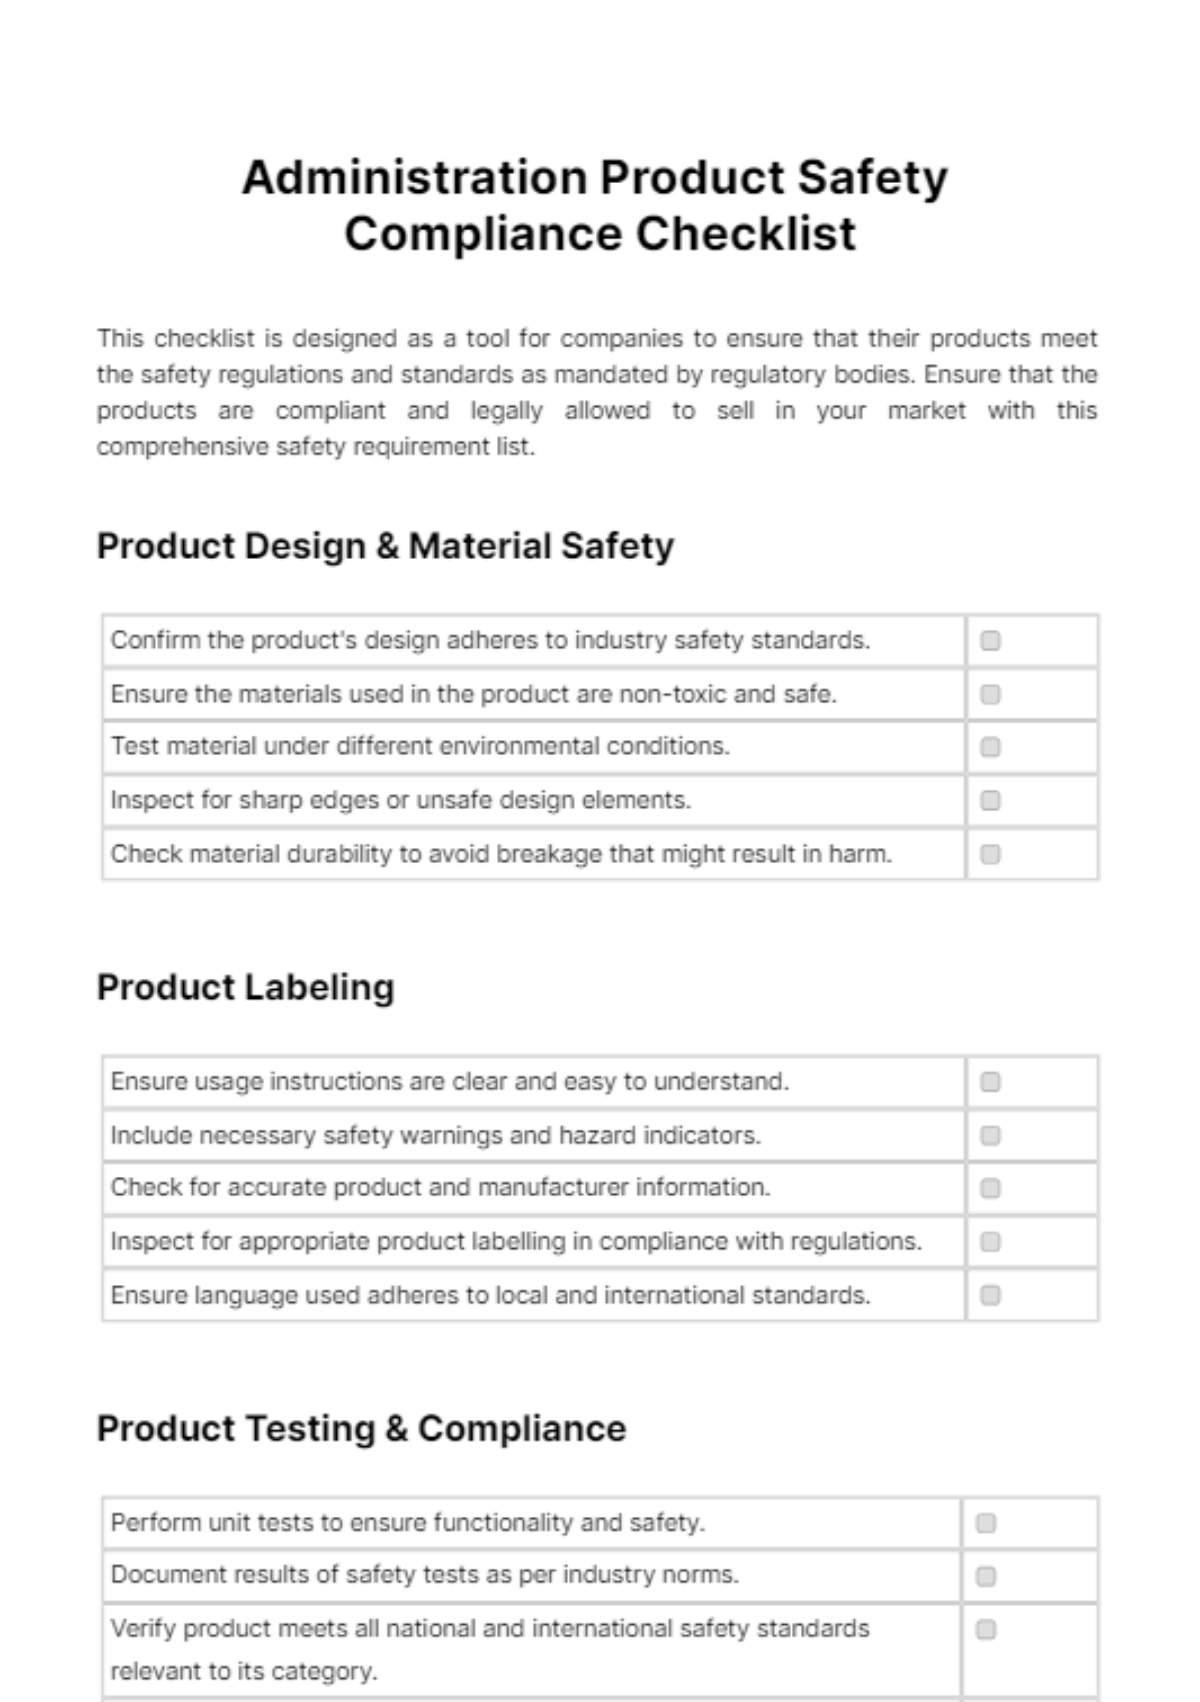 Free Administration Product Safety Compliance Checklist Template